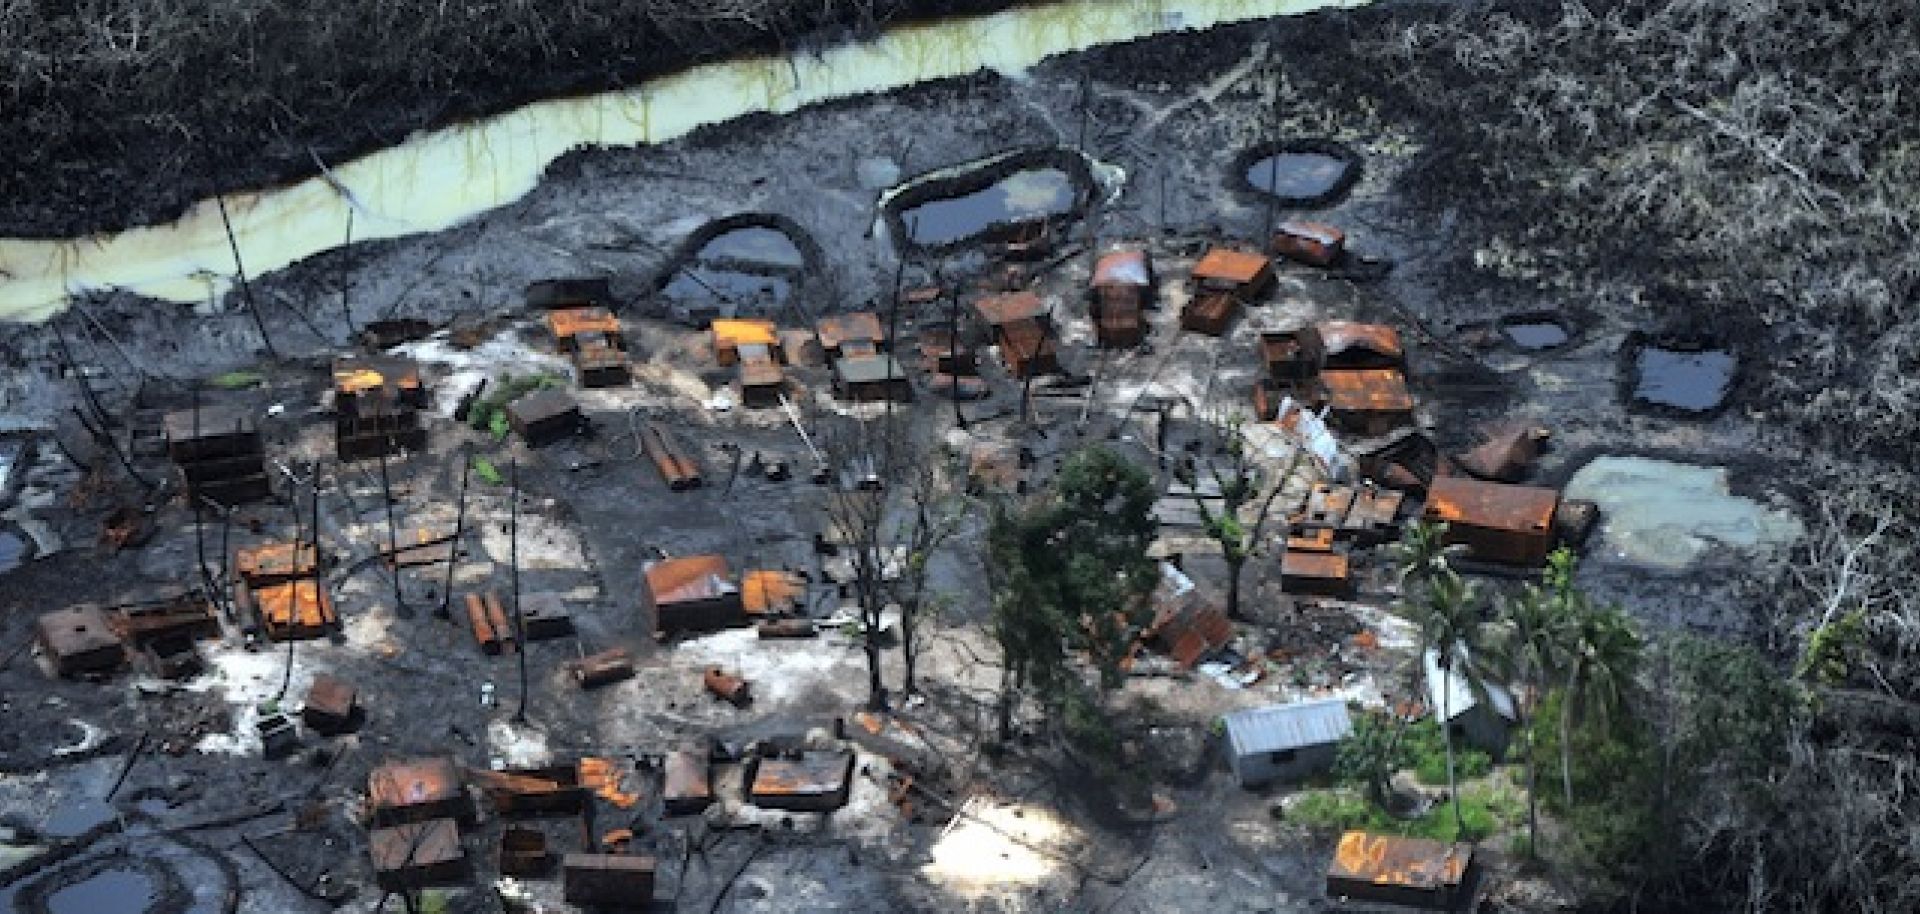 An illegal oil refinery that was destroyed by Nigerian forces at Nembe Creek in the Niger Delta on March 22.